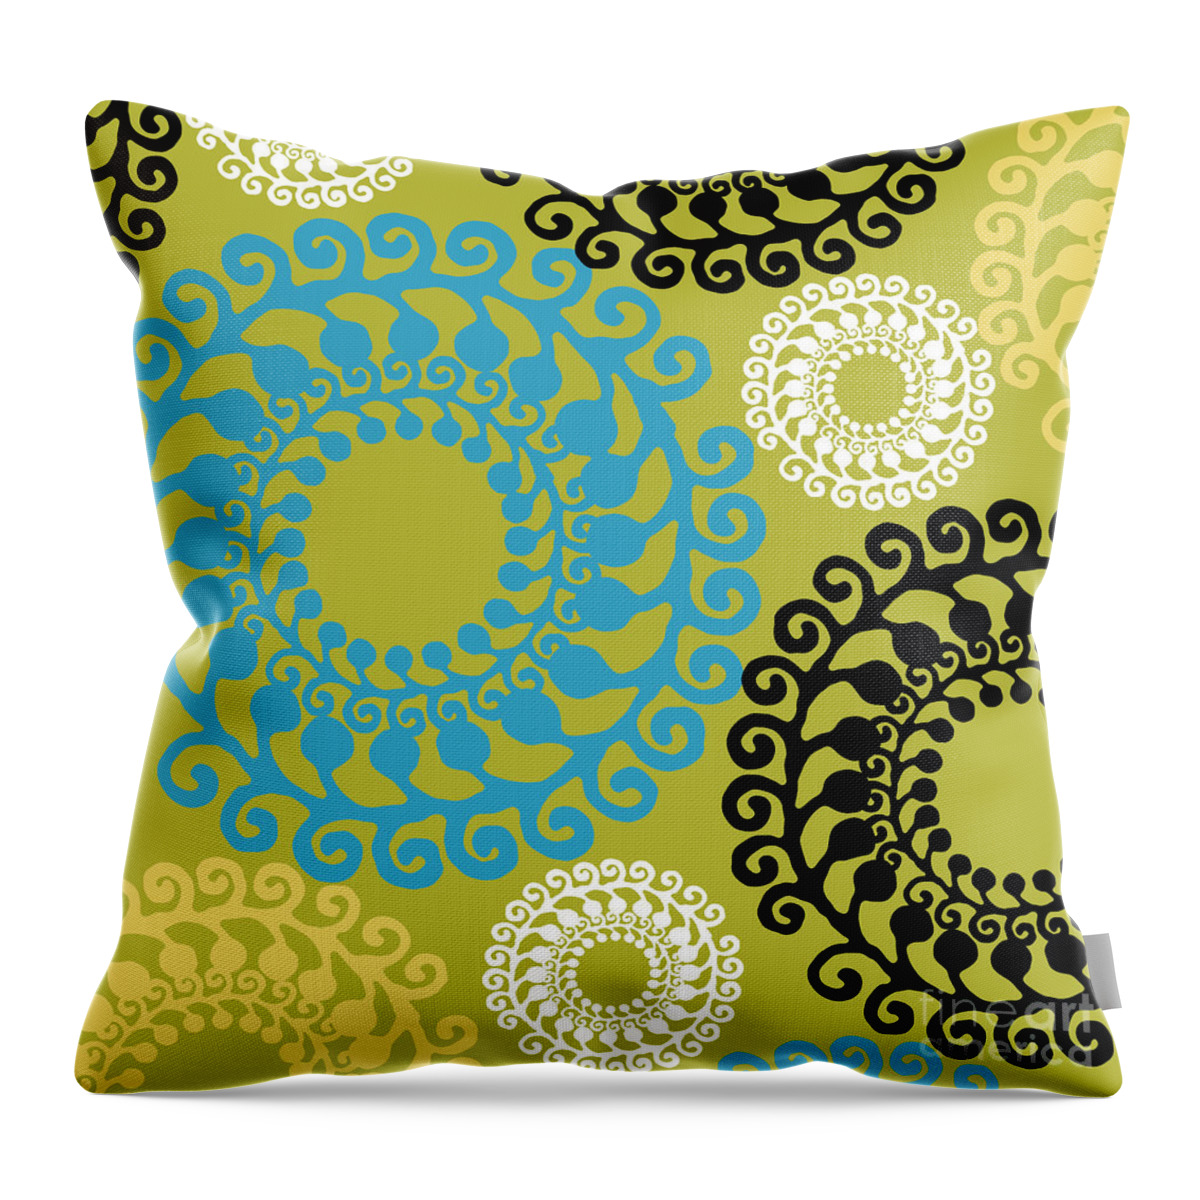 Mid Century Modern Throw Pillow featuring the painting Groovy Circles by Mindy Sommers